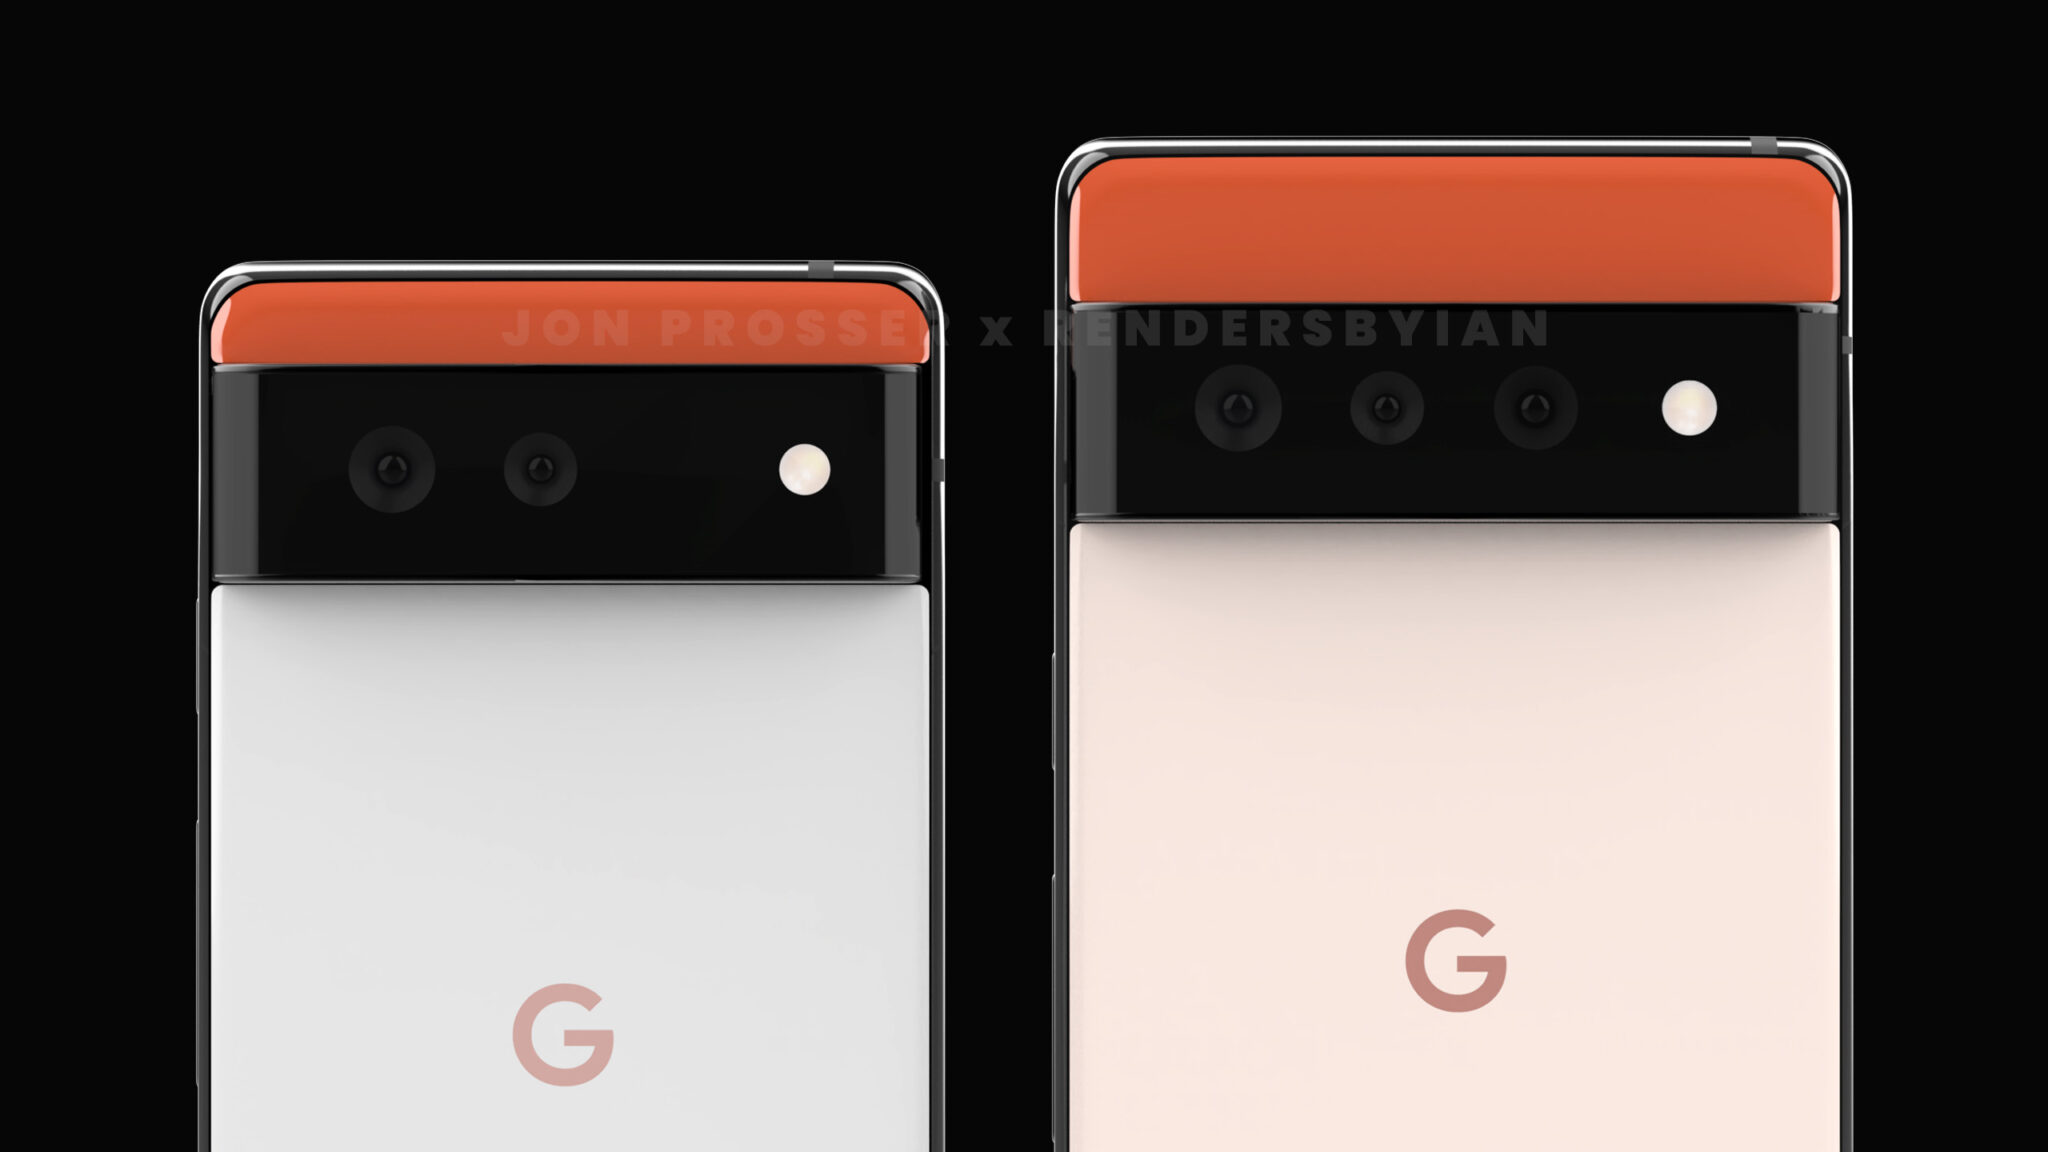 The leaky design of Google Pixel 6 indicates radical changes - Free to